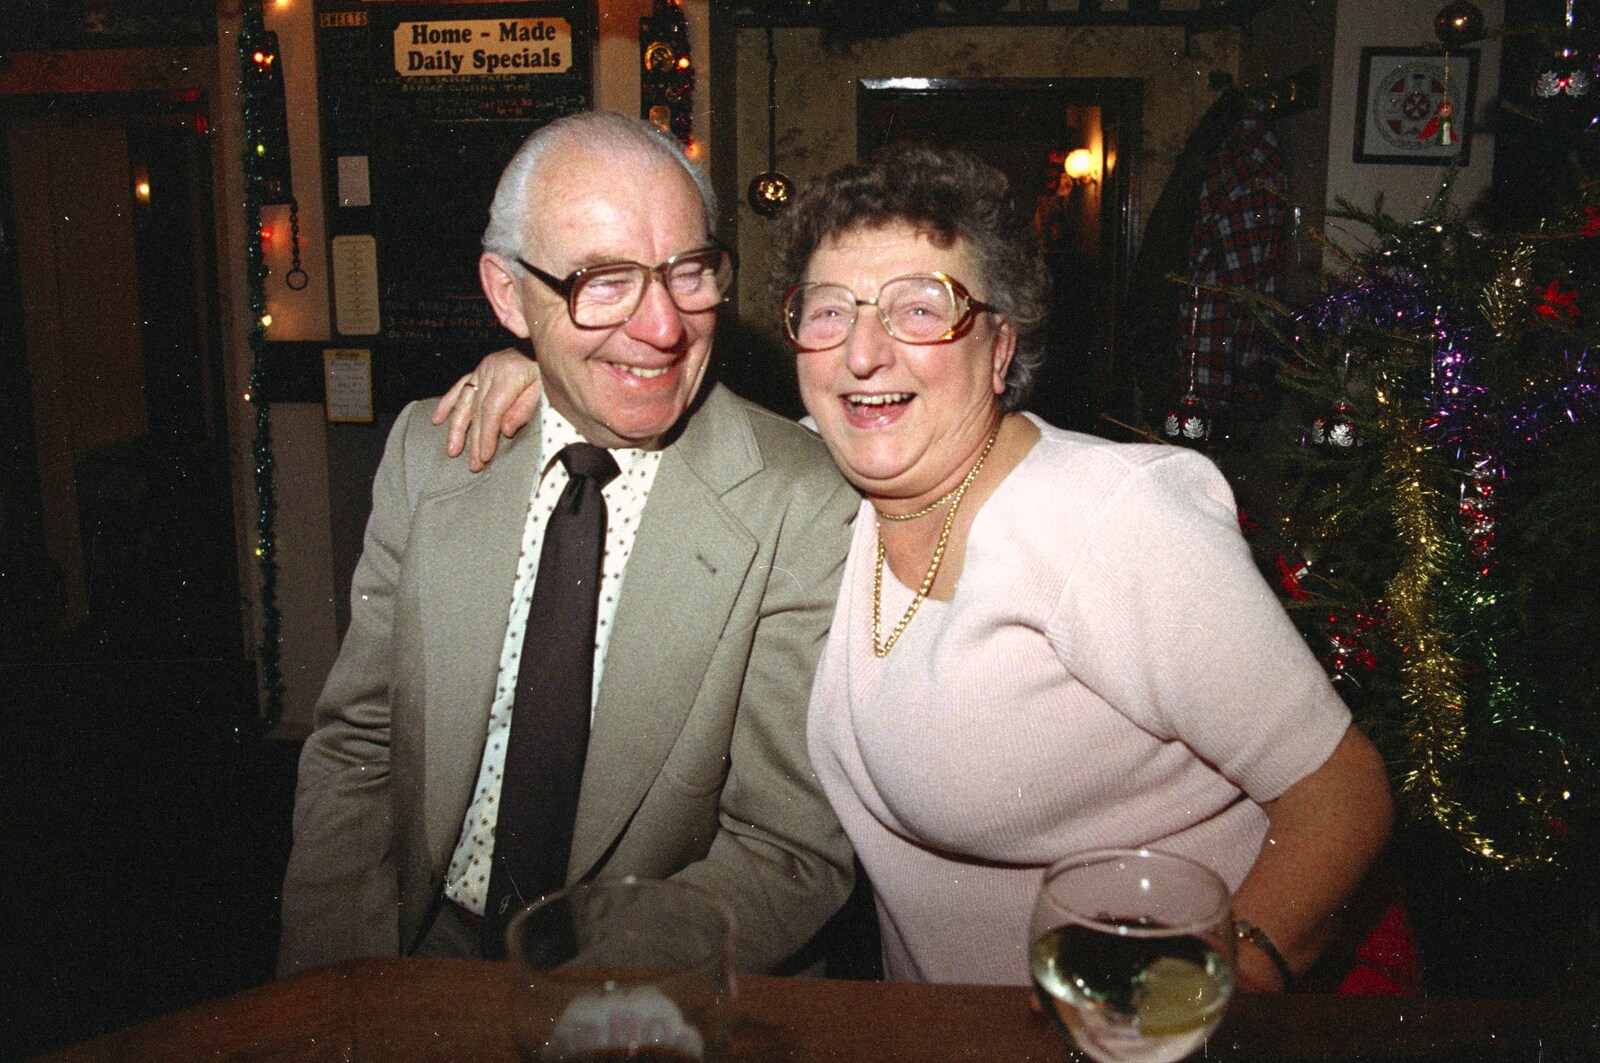 John and Arline from New Year's Eve at the Swan Inn, Brome, Suffolk - 31st December 1994